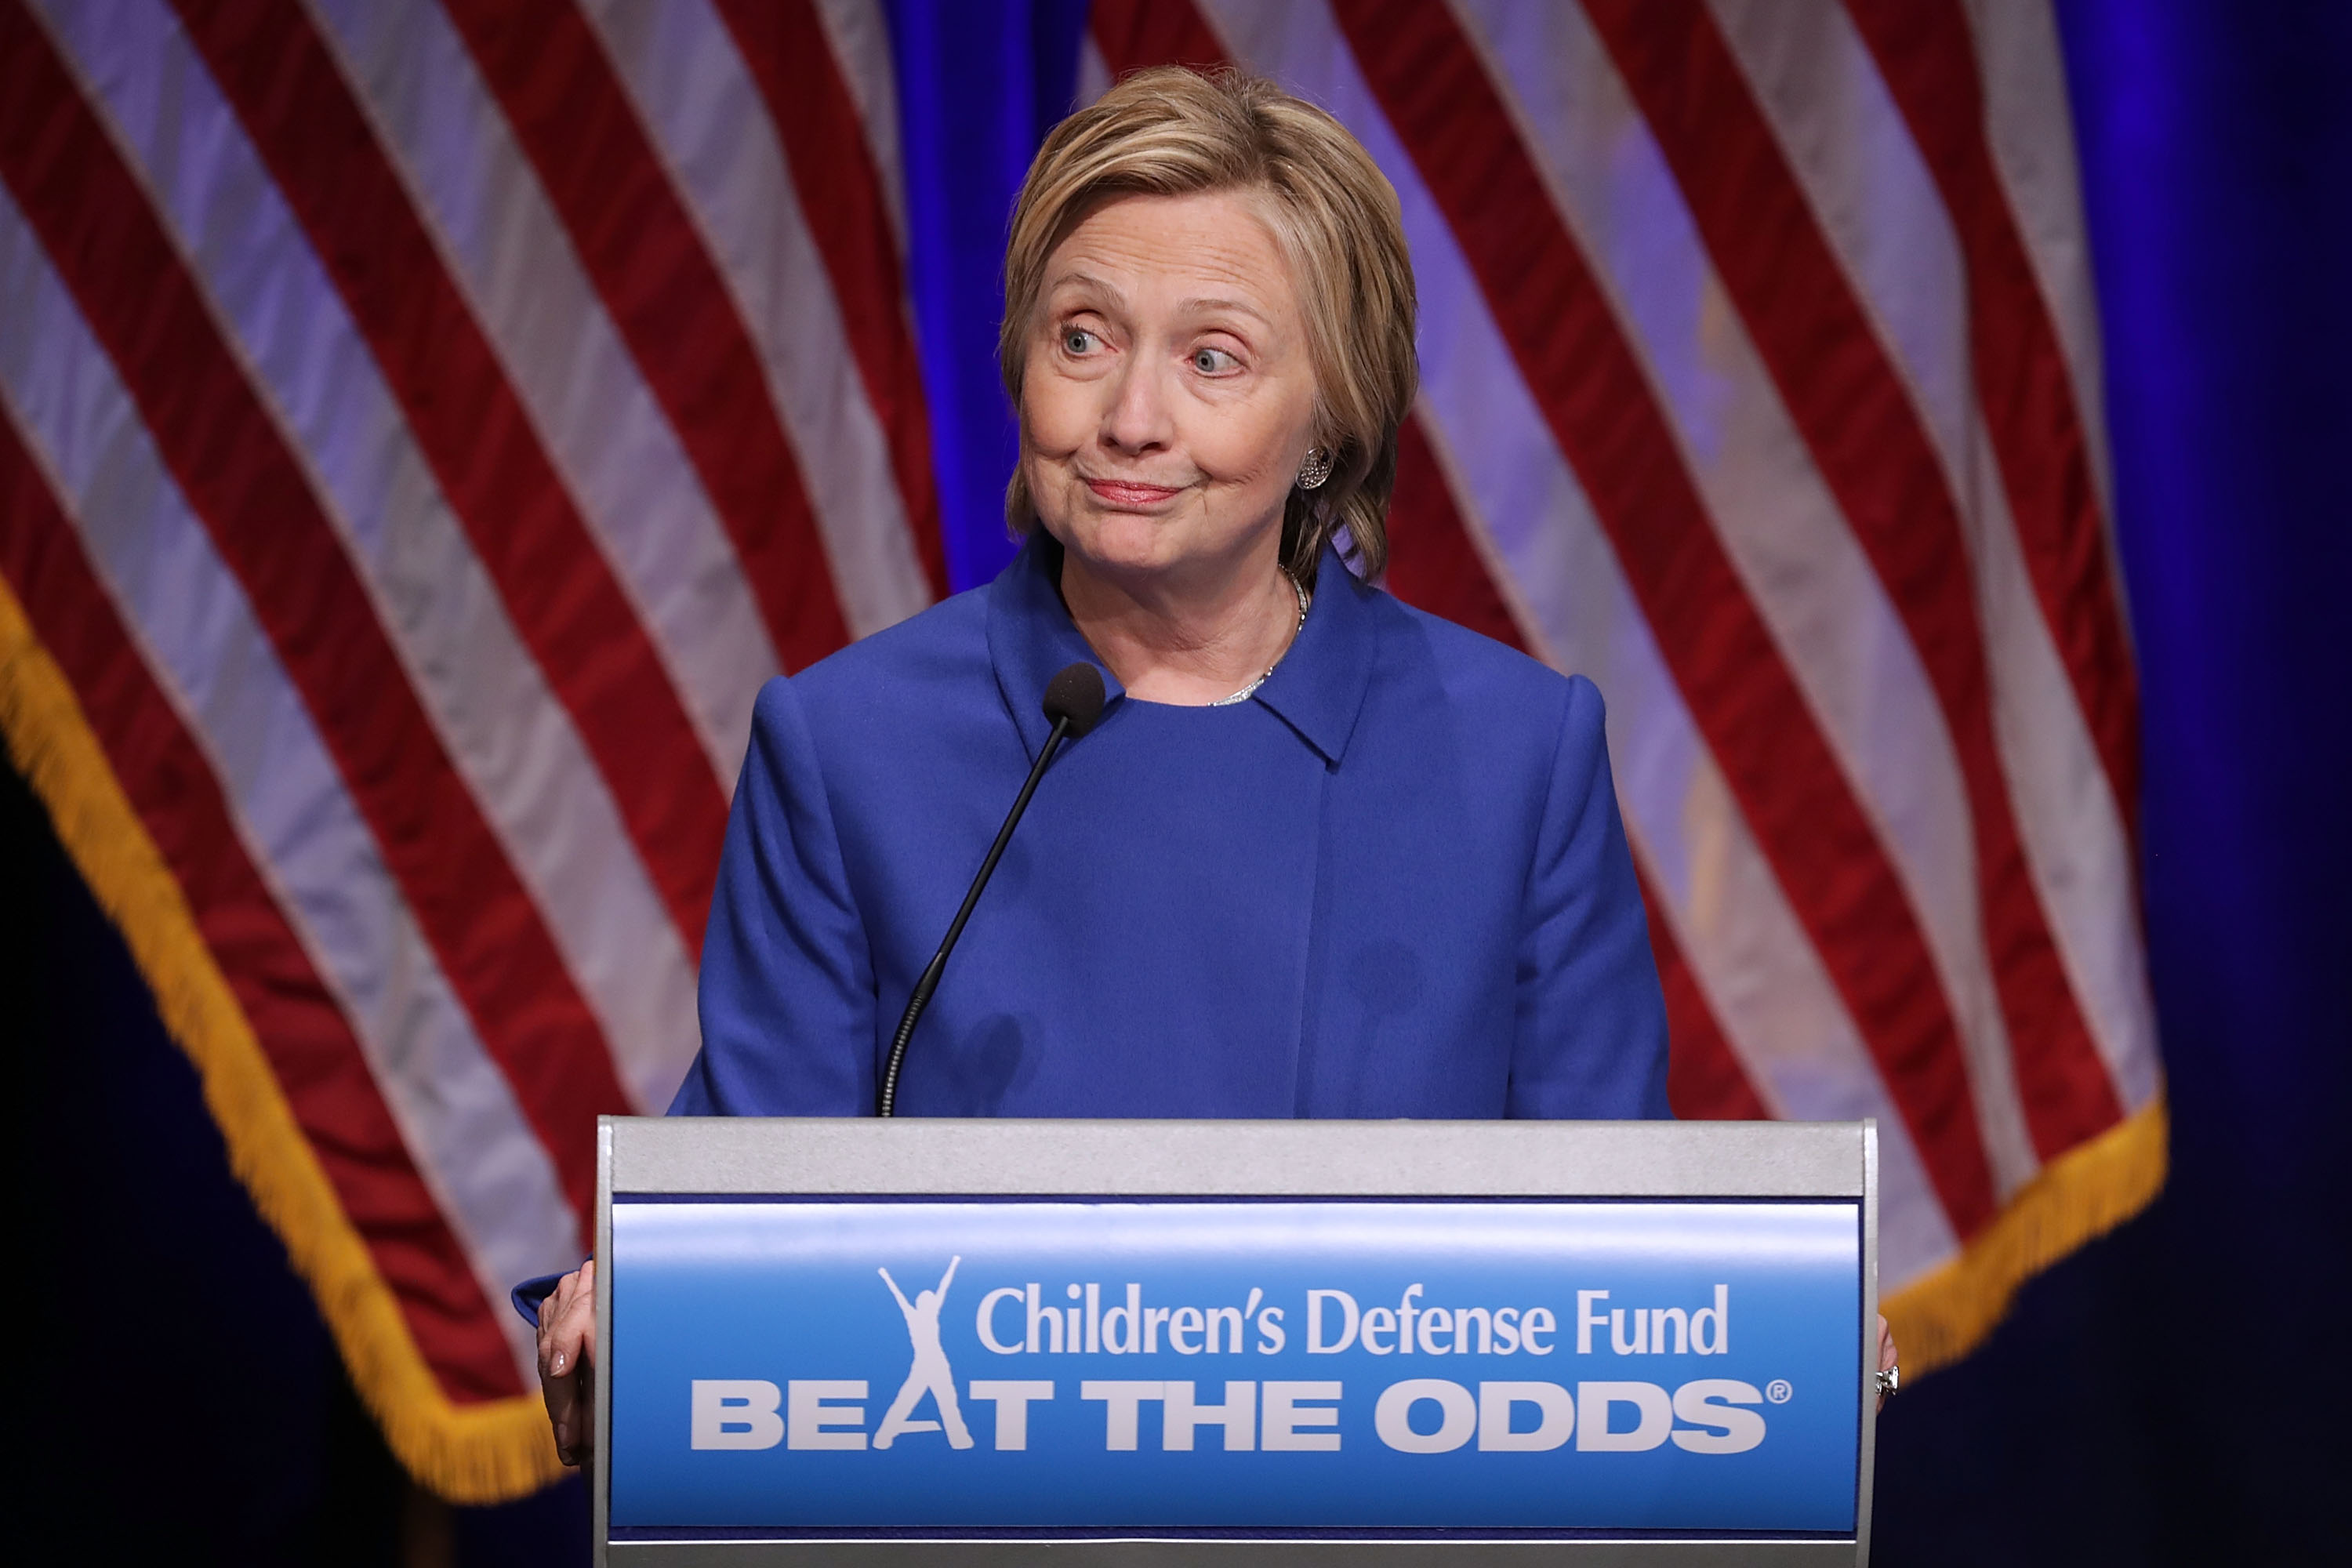 Former Secretary of State and former Democratic Presidential nominee Hillary Clinton delivers remarks while being honored during the Children's Defense Fund's Beat the Odds Celebration at the Newseum in Washington on Nov. 16, 2016. (Chip Somodevilla—Getty Images)